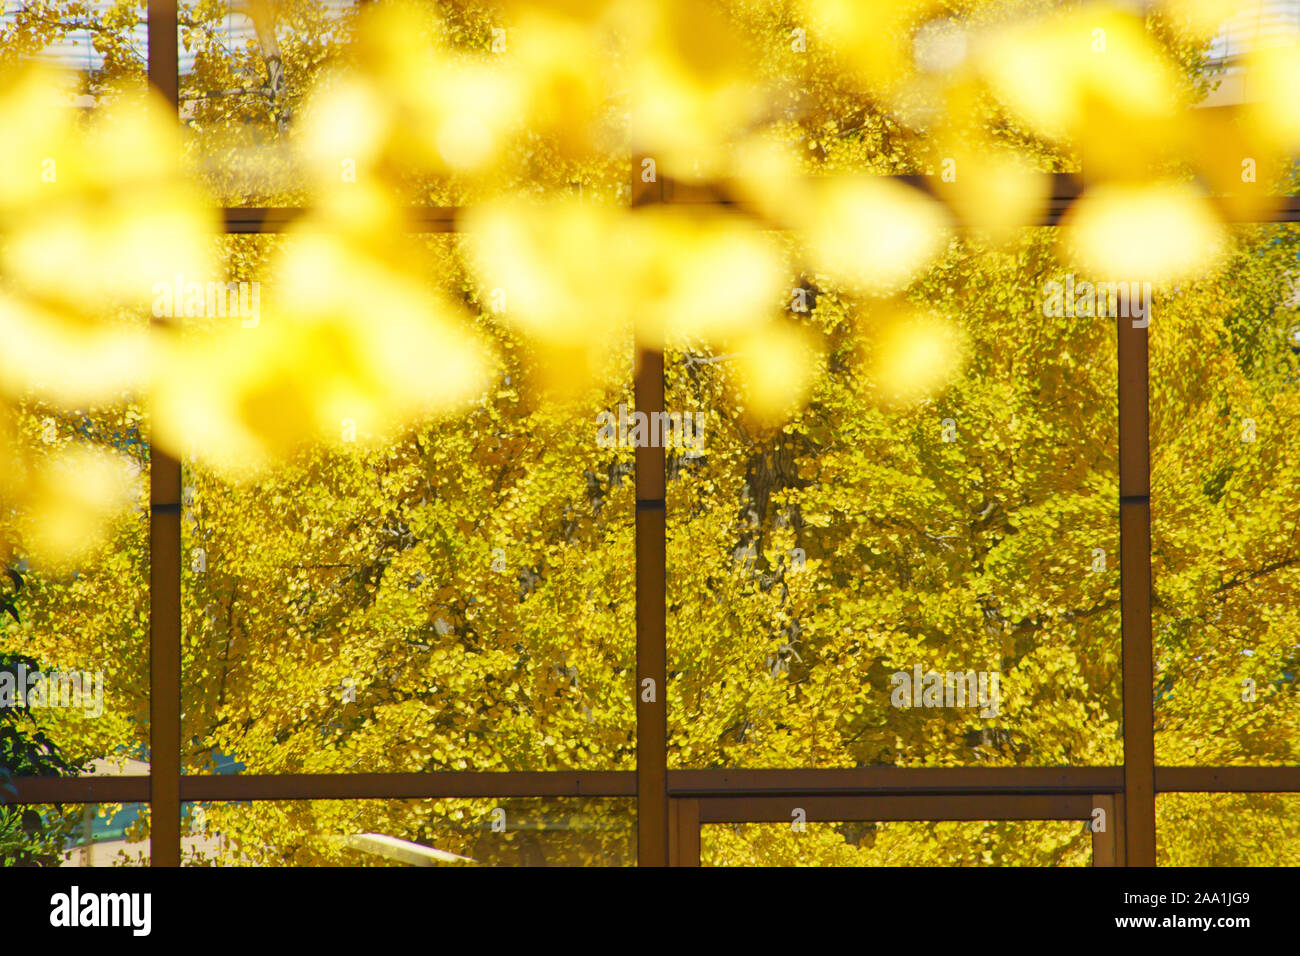 Yellow ginkgo leaves reflected in glass window of building Stock Photo